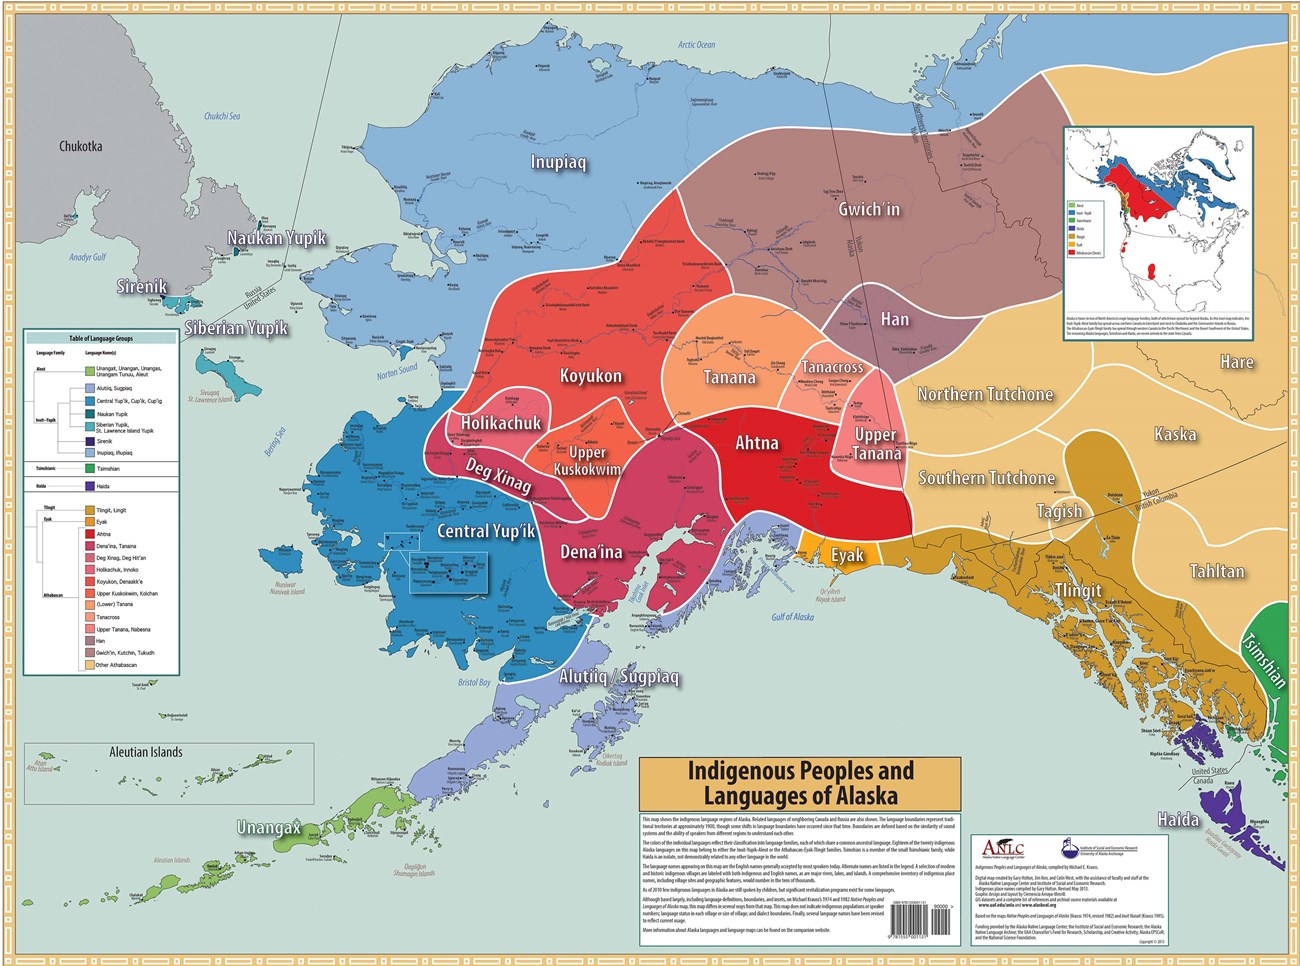 A map the Alaska depicting indigenous groups and languages across the state.